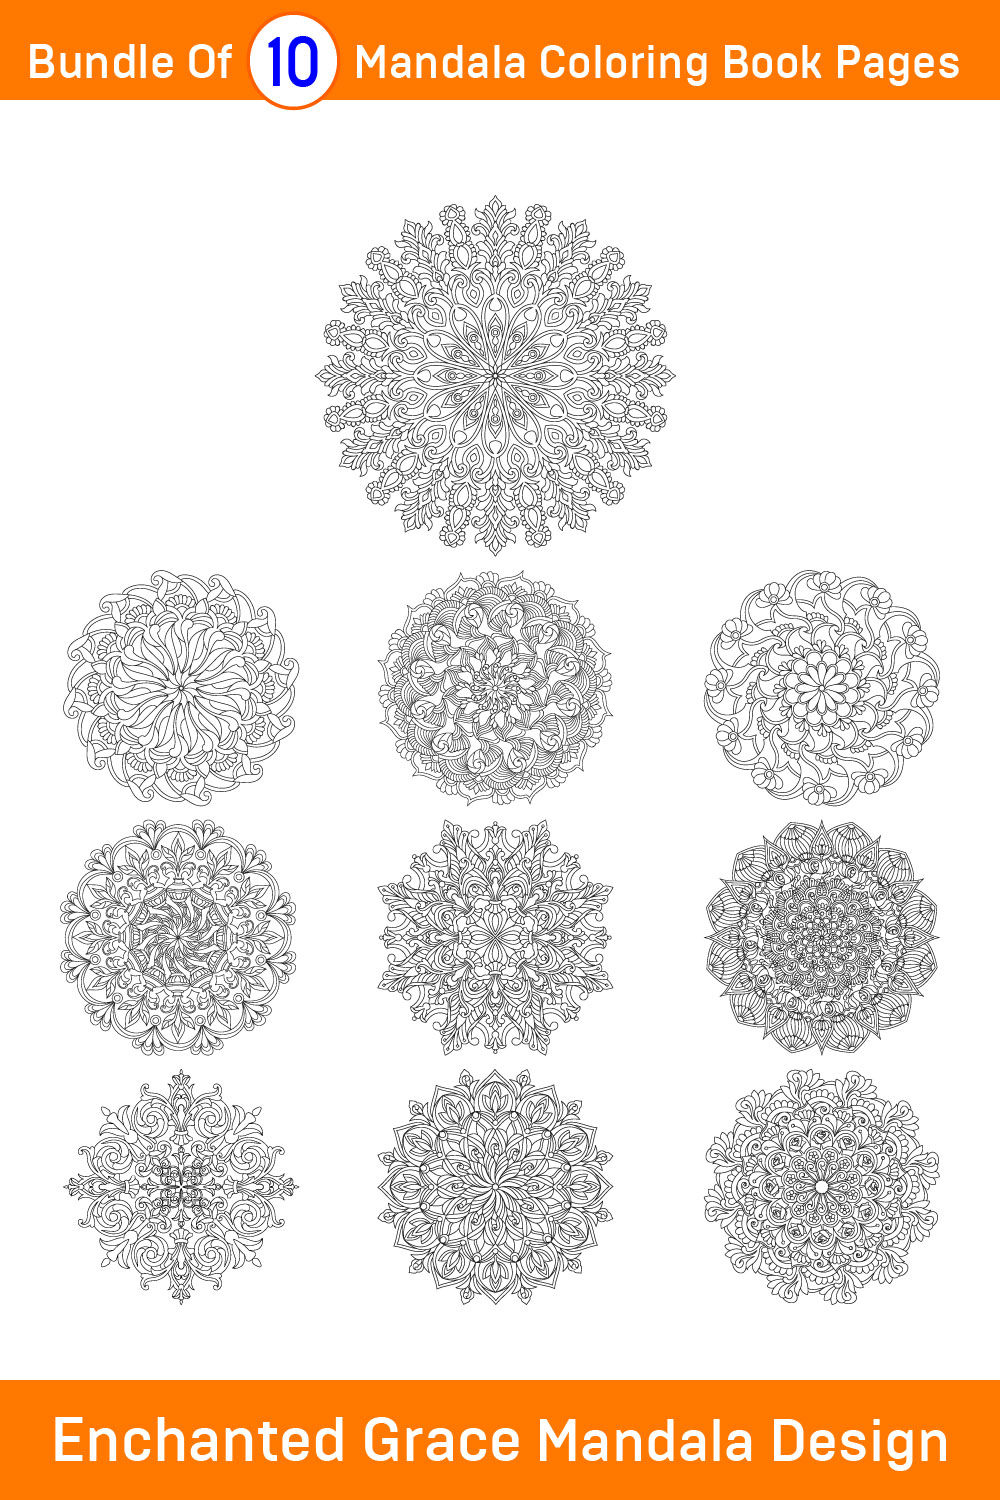 Bundle of 10 Enchanted Grace Mandala for KDP Coloring Book interior Pages pinterest preview image.